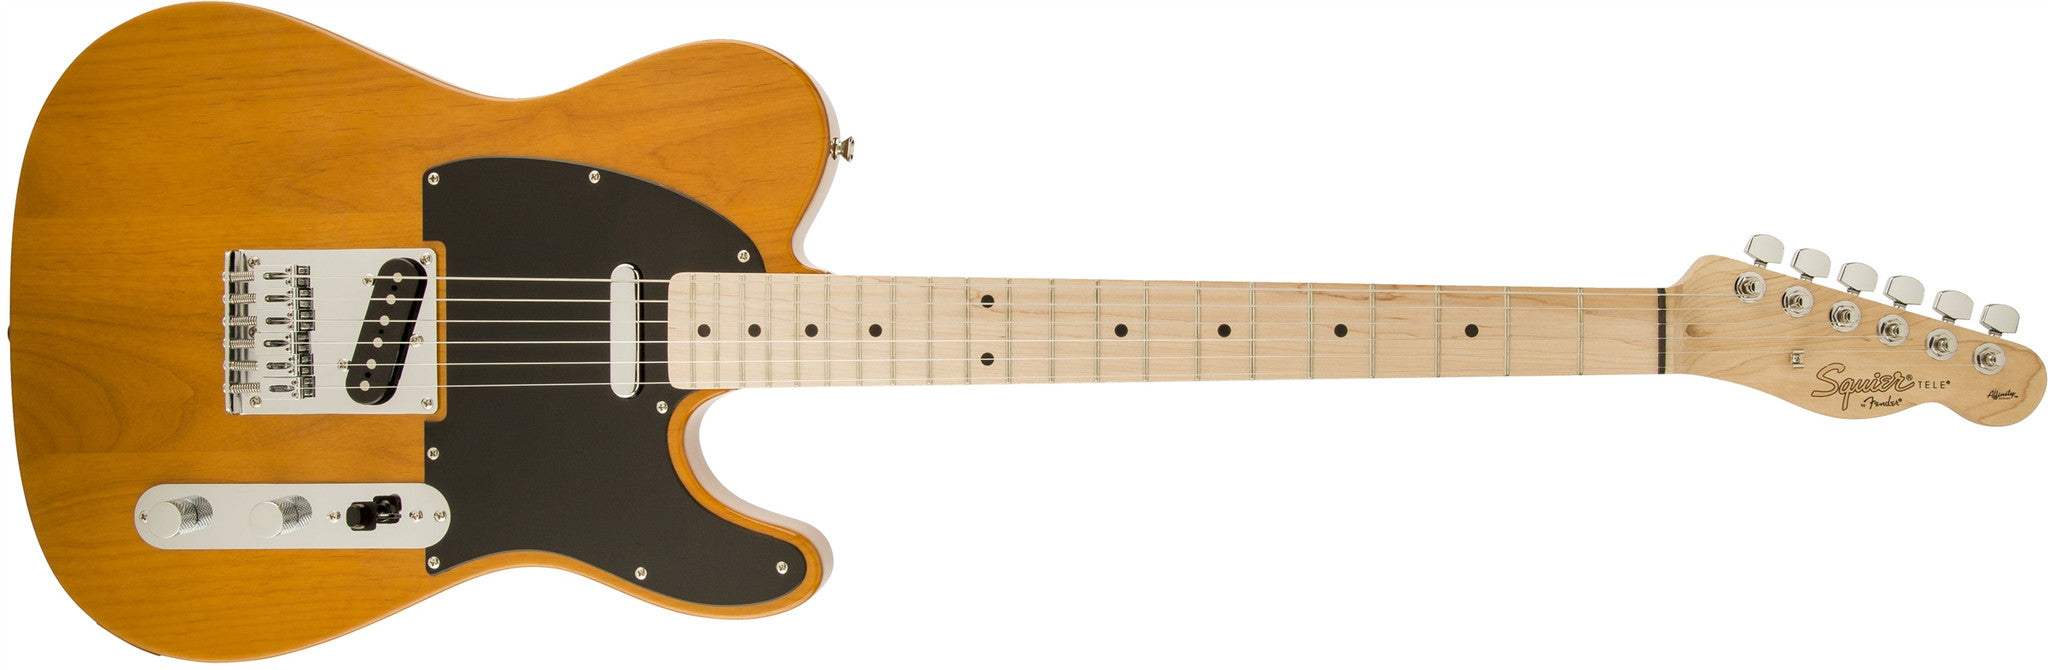 Squier Affinity Series Telecaster, Maple Fingerboard, Butterscotch